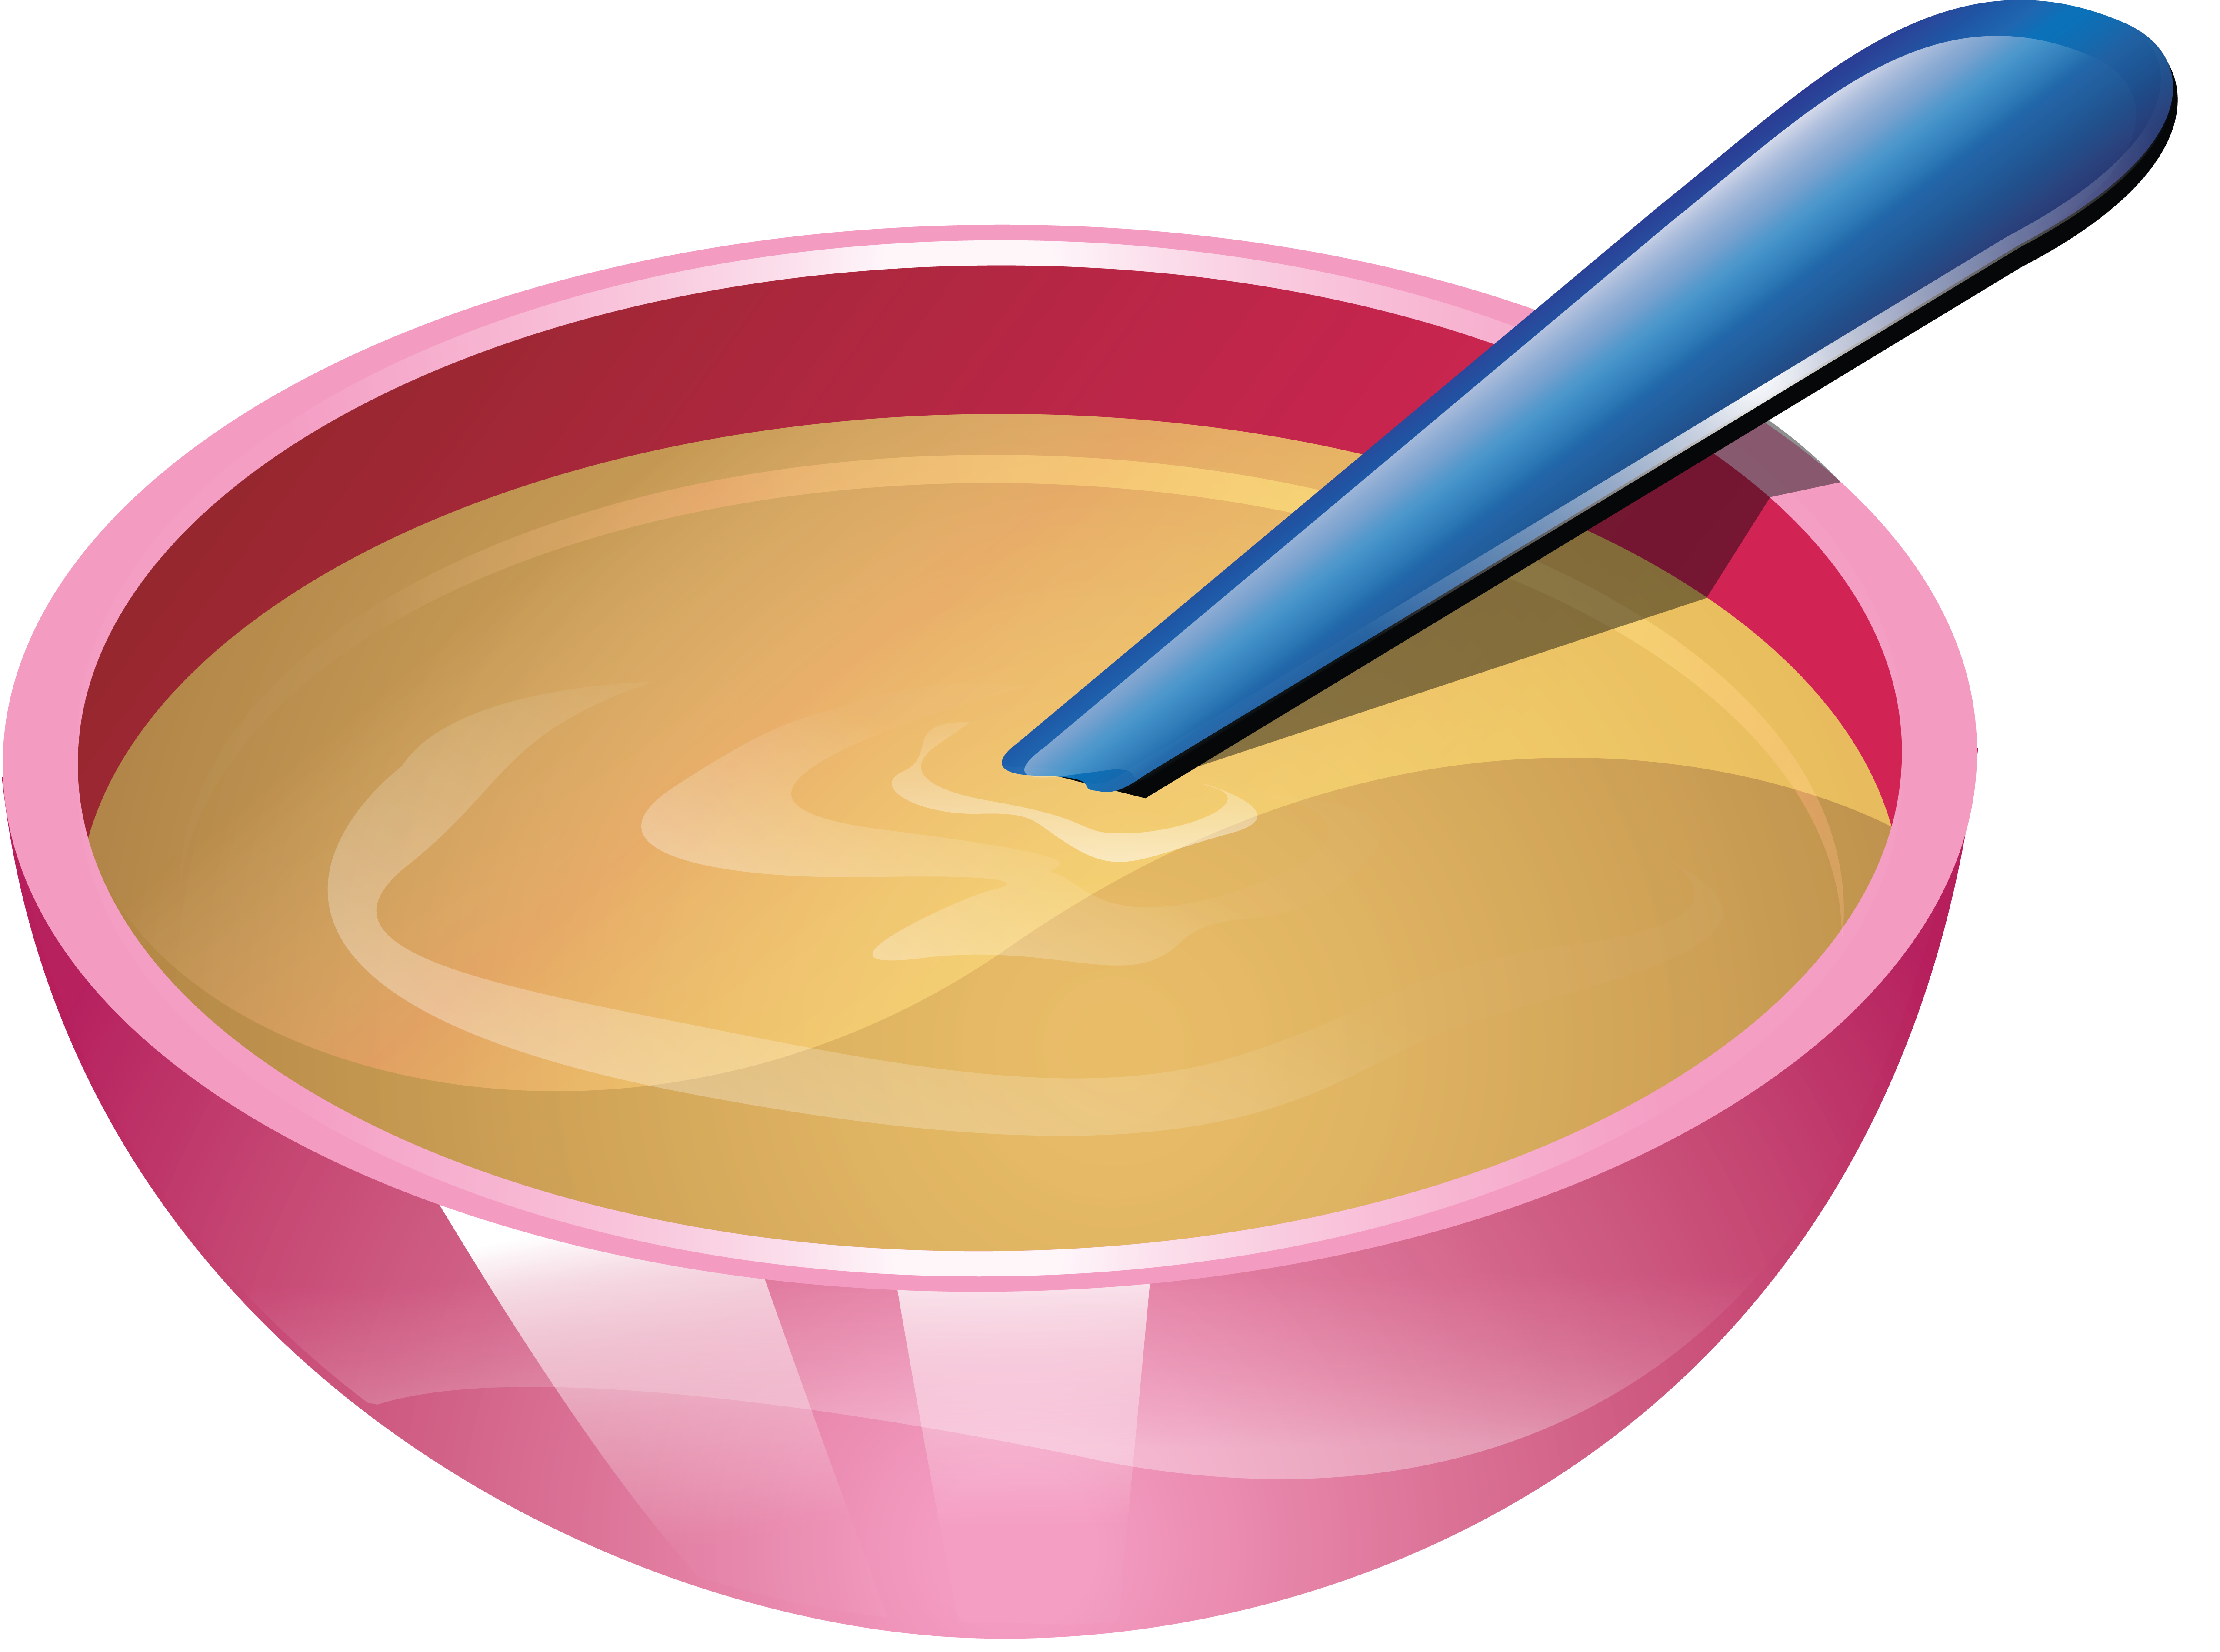 Download clipart soup in pink bowl PNG Image for Free